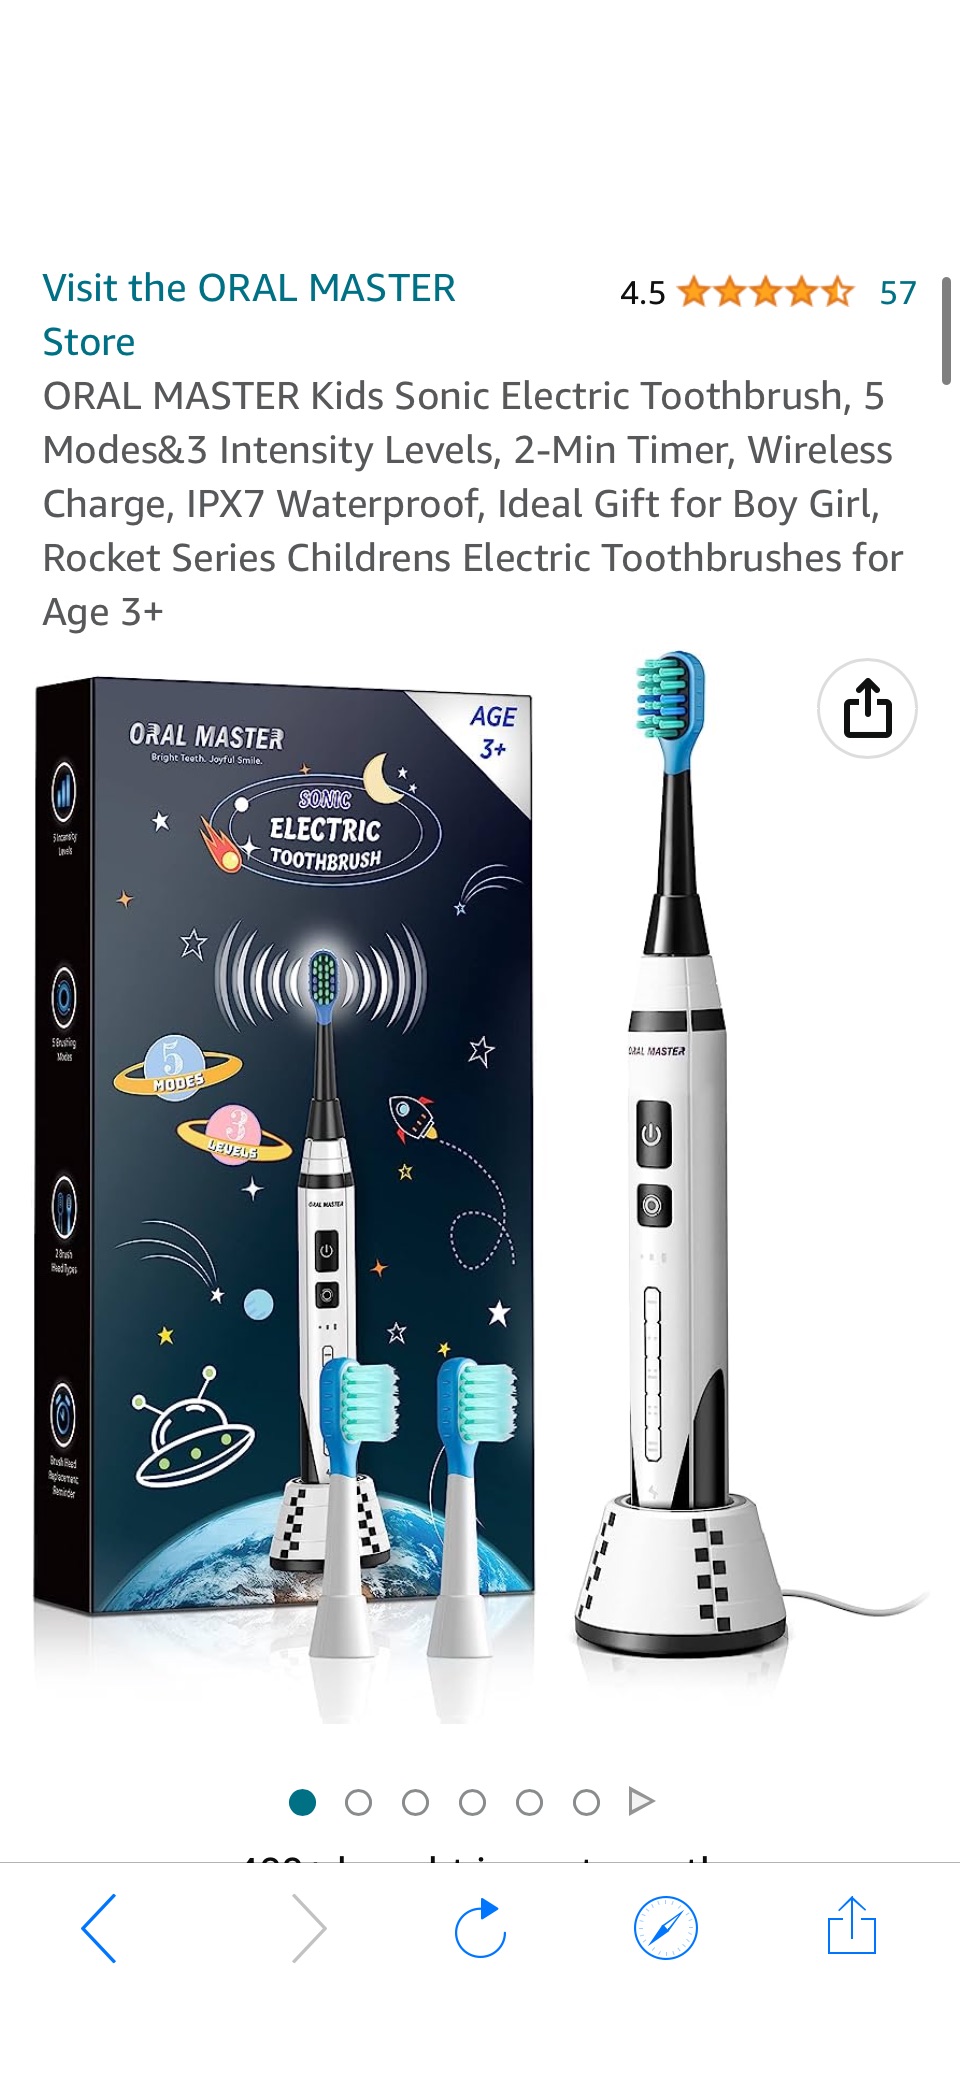 Amazon.com: ORAL MASTER Kids Sonic Electric Toothbrush, 5 Modes&3 Intensity Levels, 2-Min Timer, Wireless Charge, IPX7 Waterproof, Ideal Gift for原价28.99